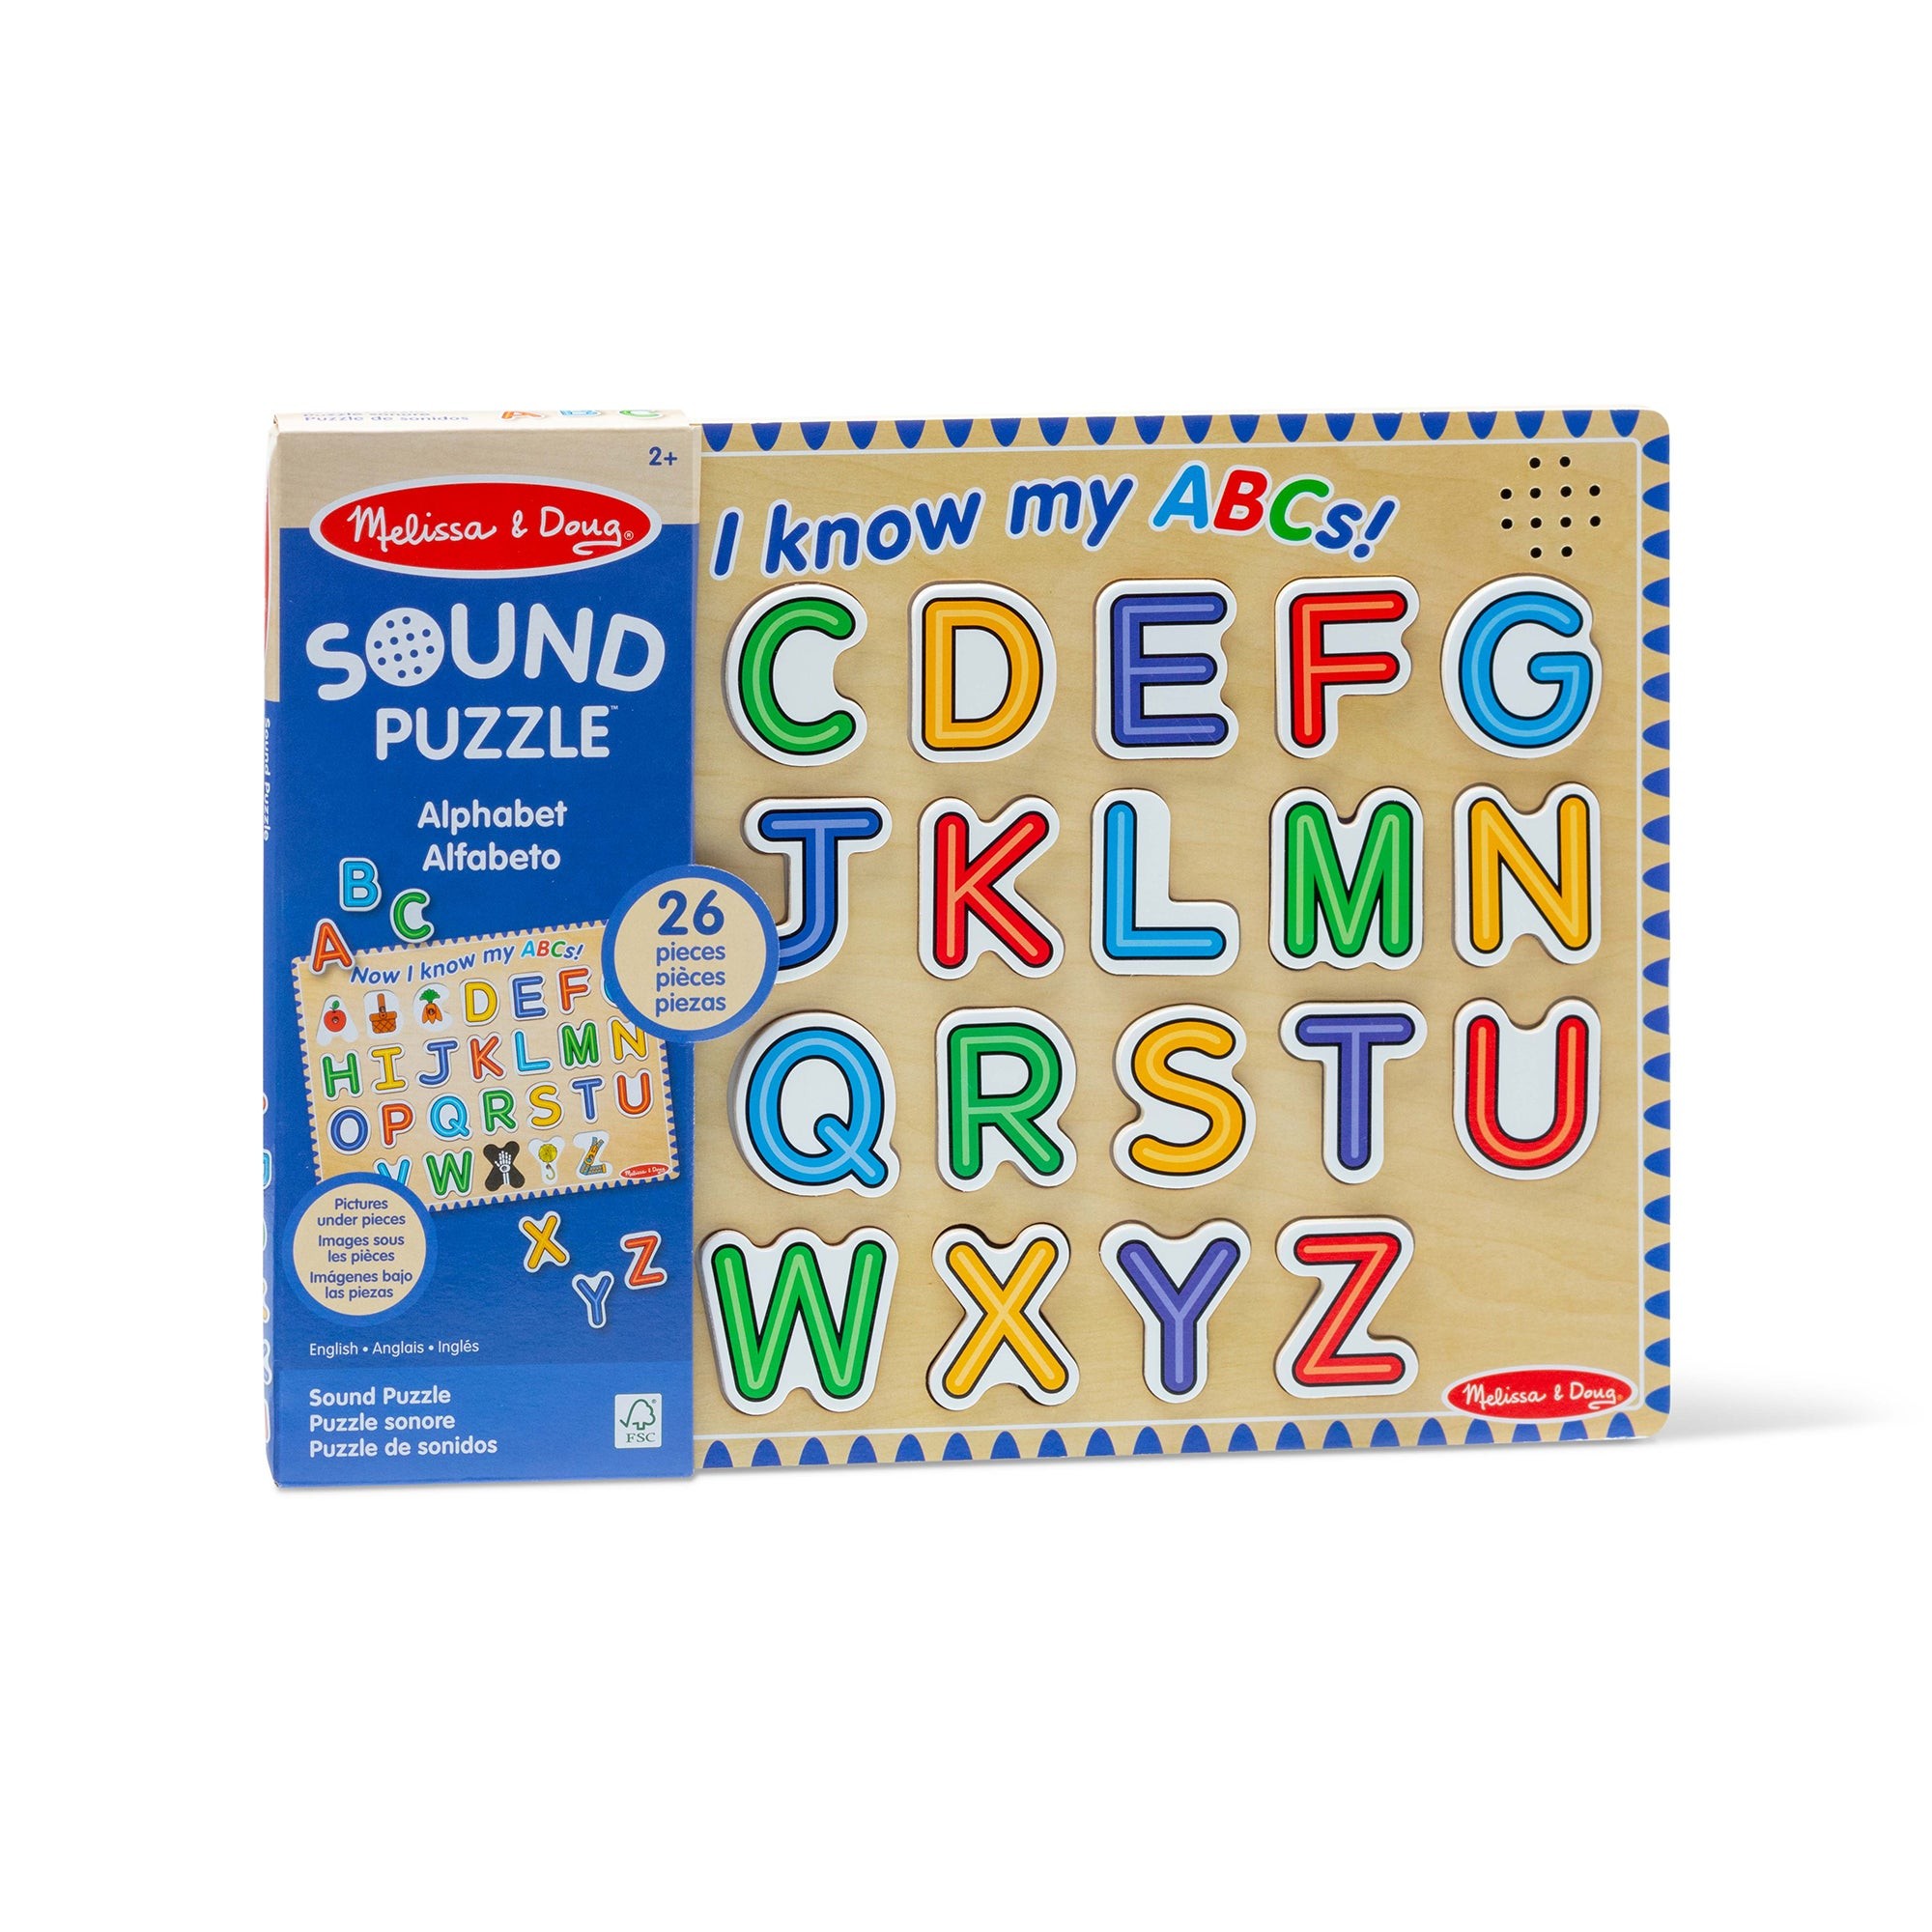 Alphabet Sound Puzzle Ages 3-6 Years